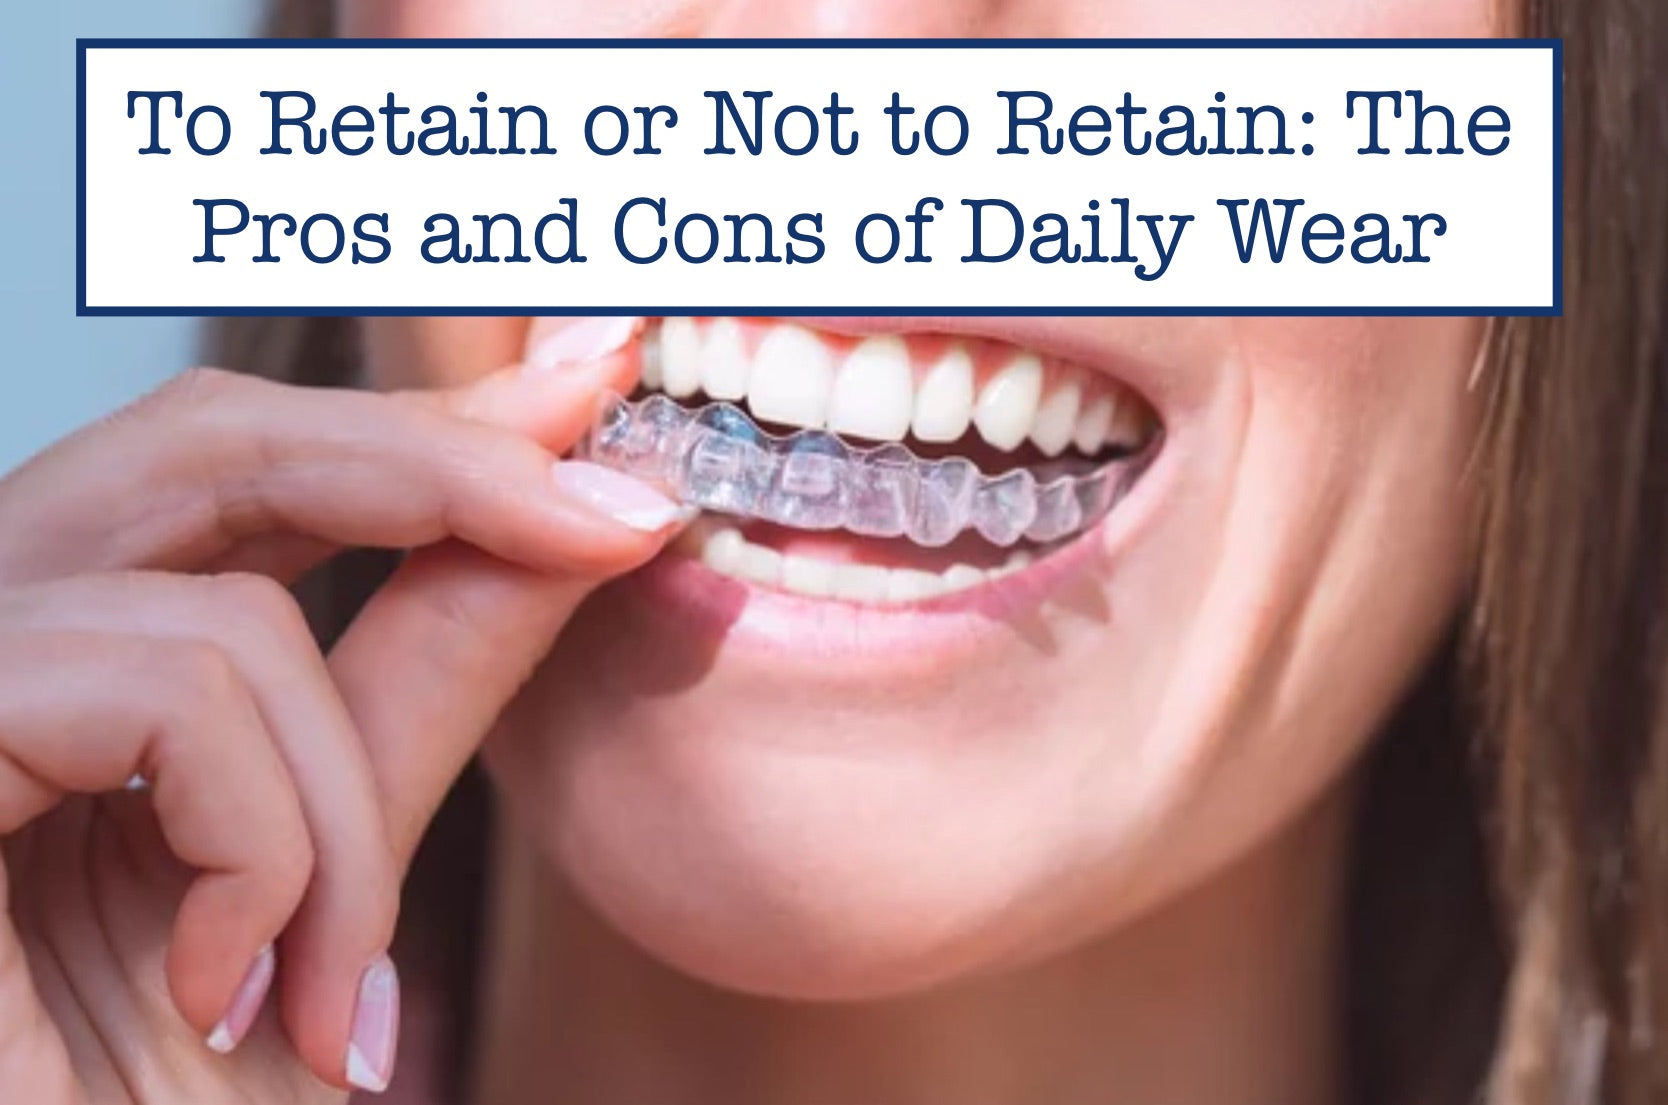 To Retain or Not to Retain: The Pros and Cons of Daily Wear